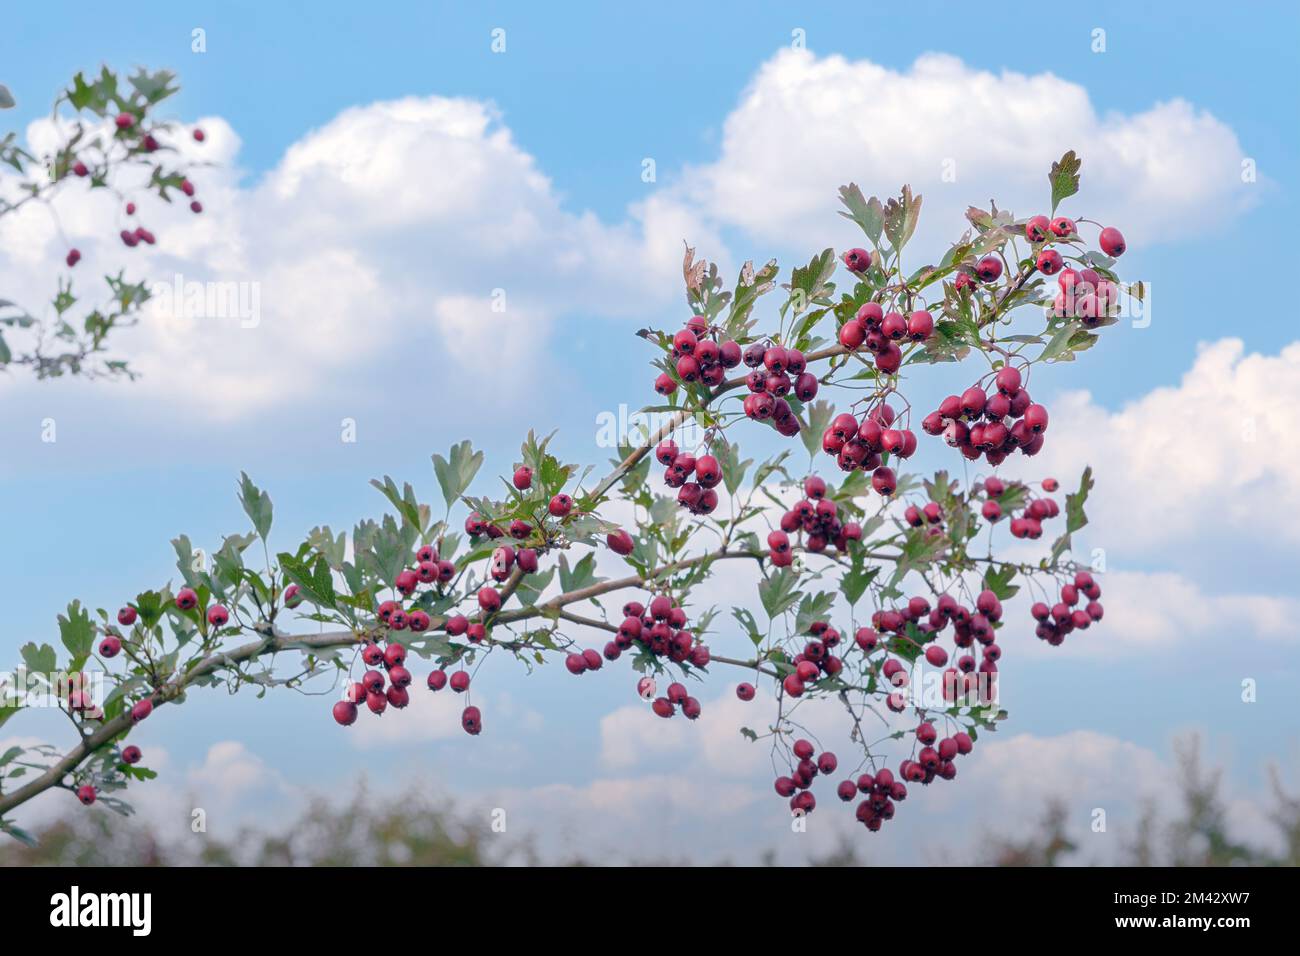 A branch of a wild-growing red berry in late autumn against a blue sky Stock Photo